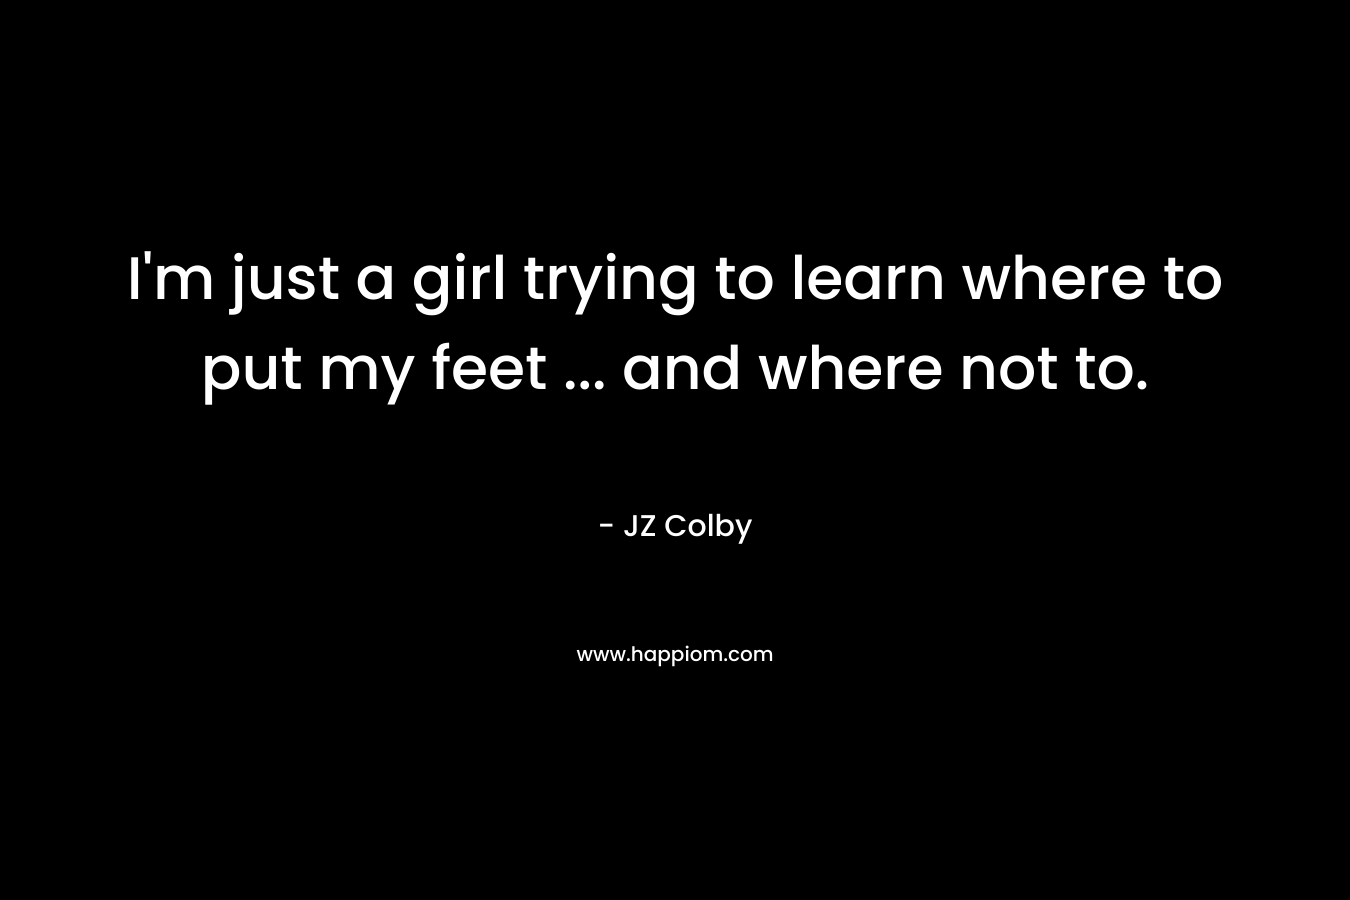 I'm just a girl trying to learn where to put my feet ... and where not to.